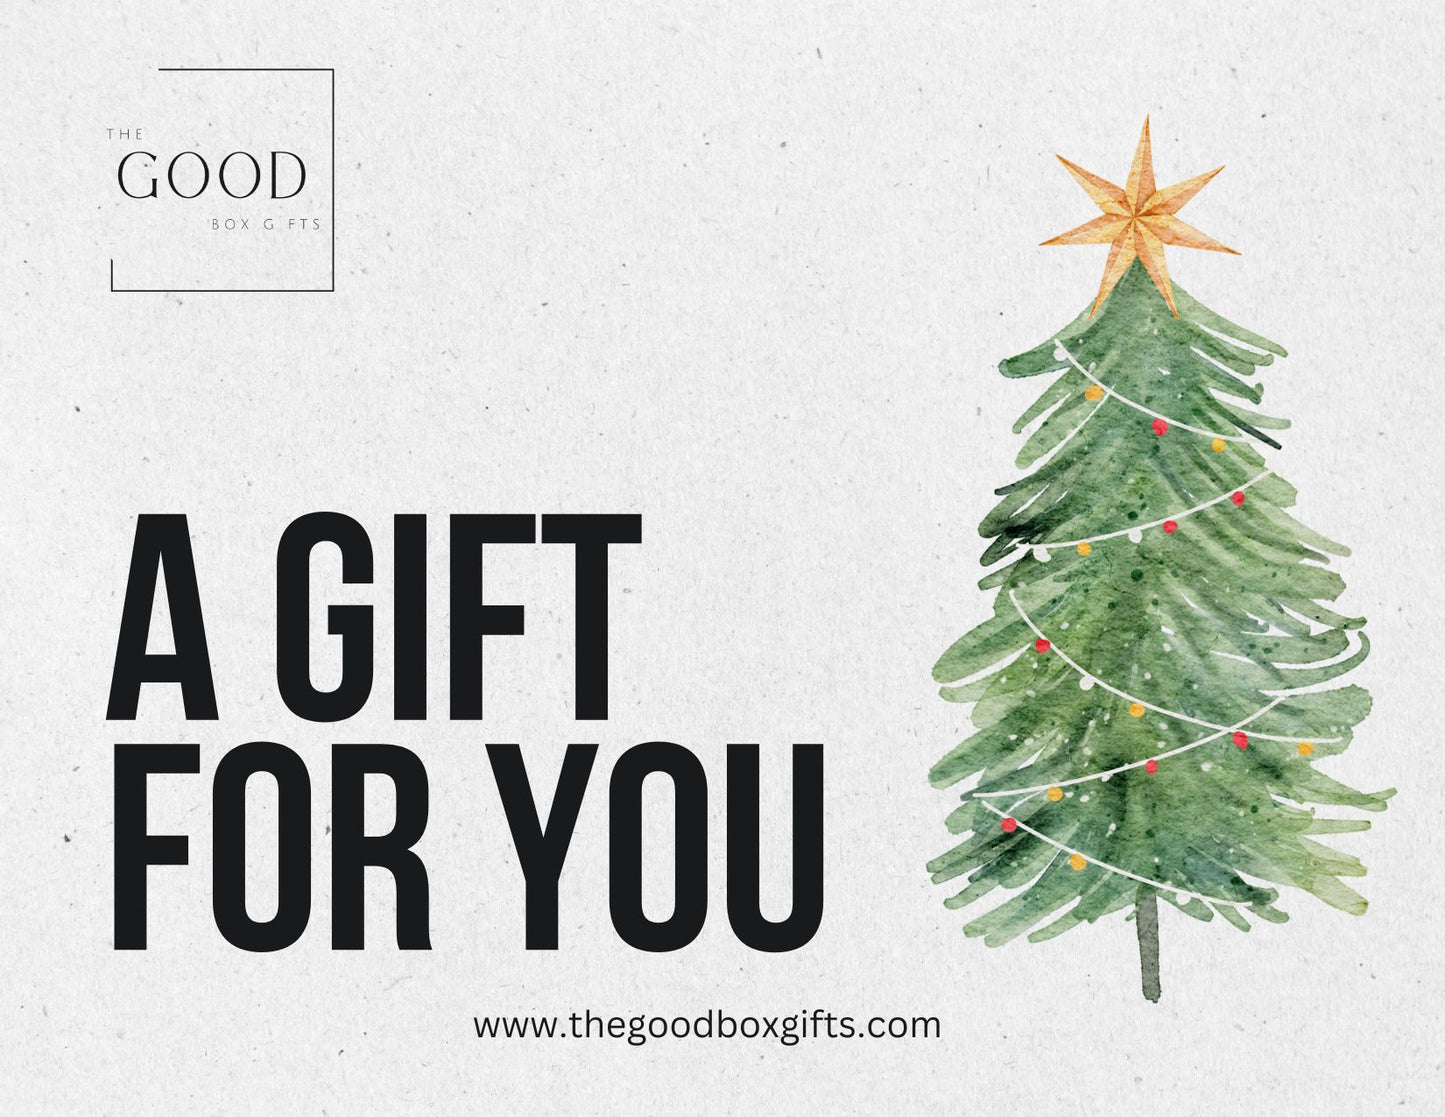 The Good Box Gifts Gift Card